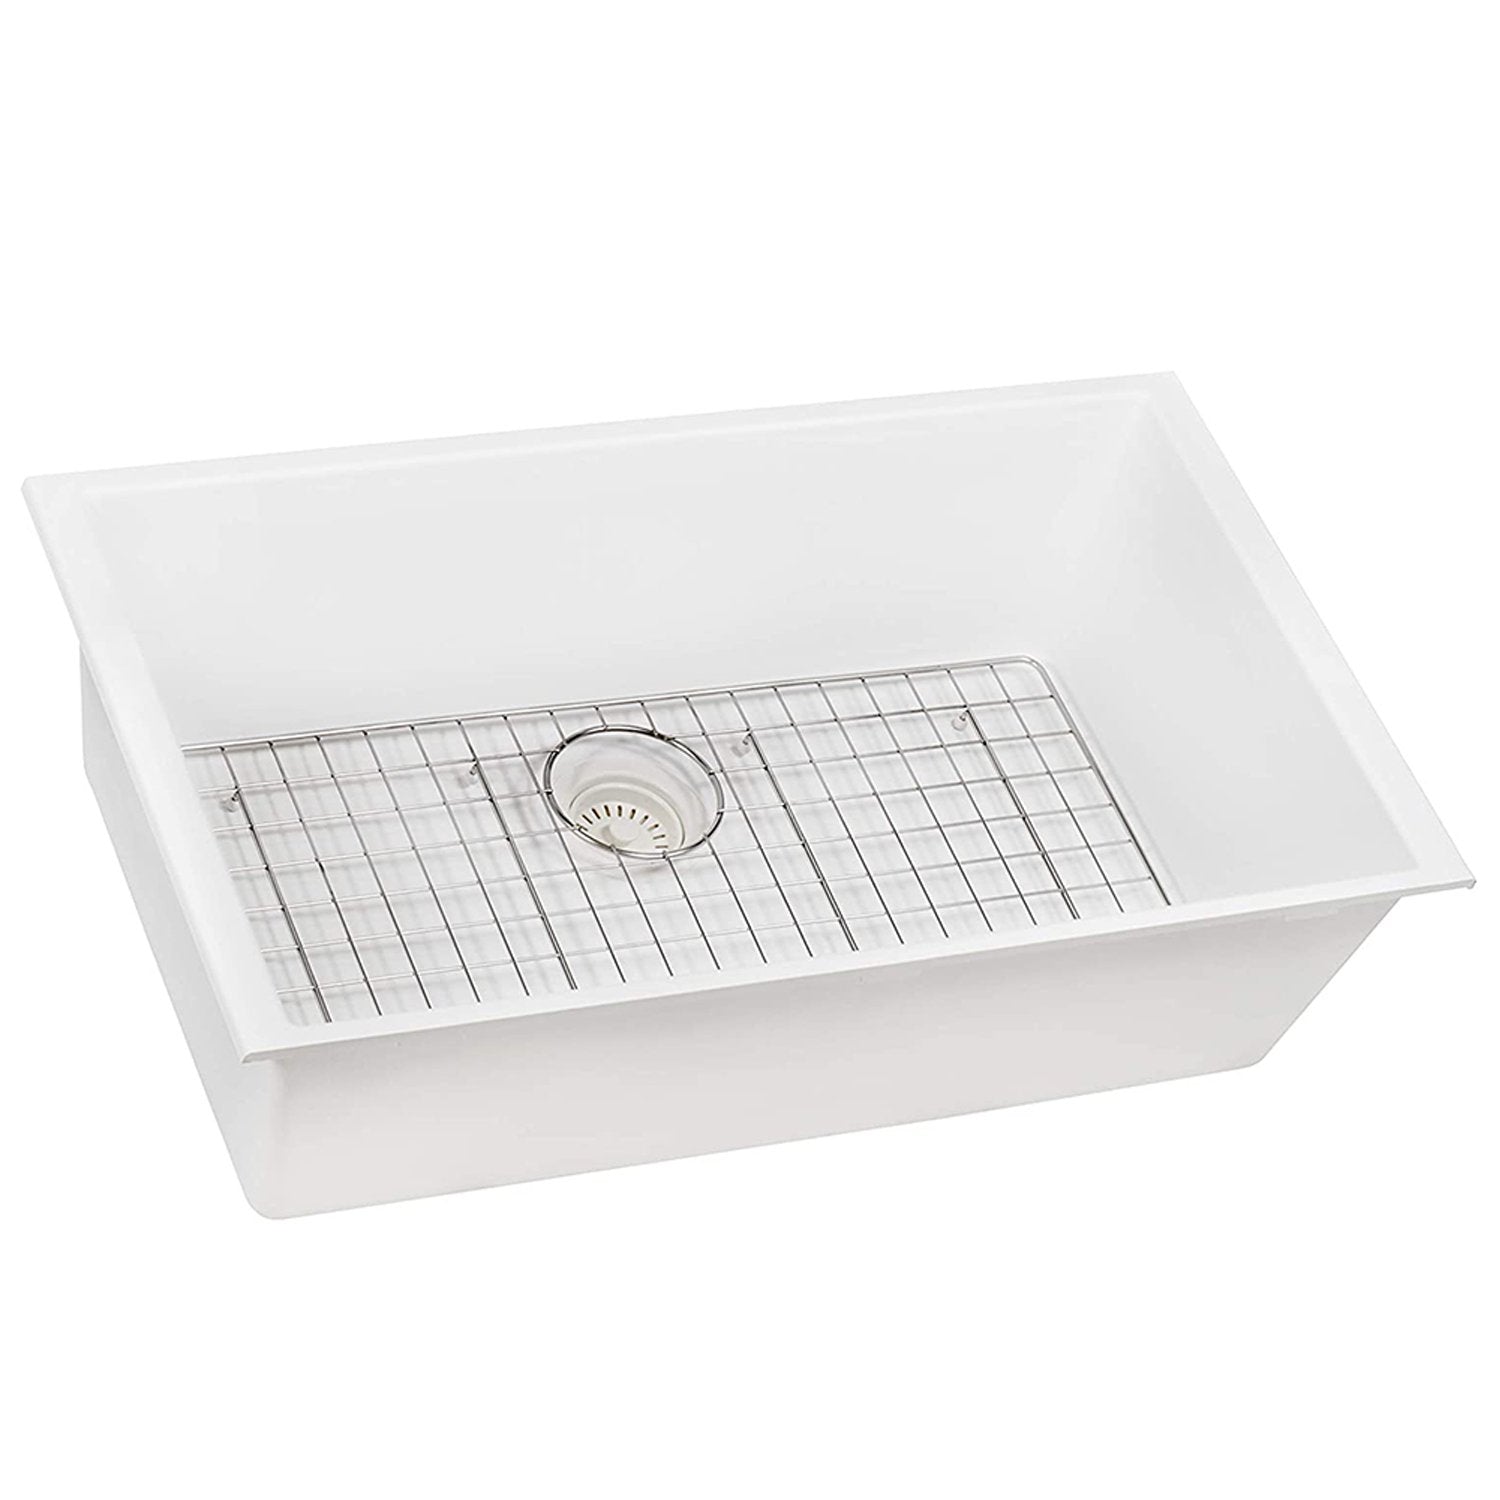 Ruvati 25" x 14" Stainless Steel Bottom Grid for RVG1030 and RVG2030 Kitchen Sinks  RVA61030